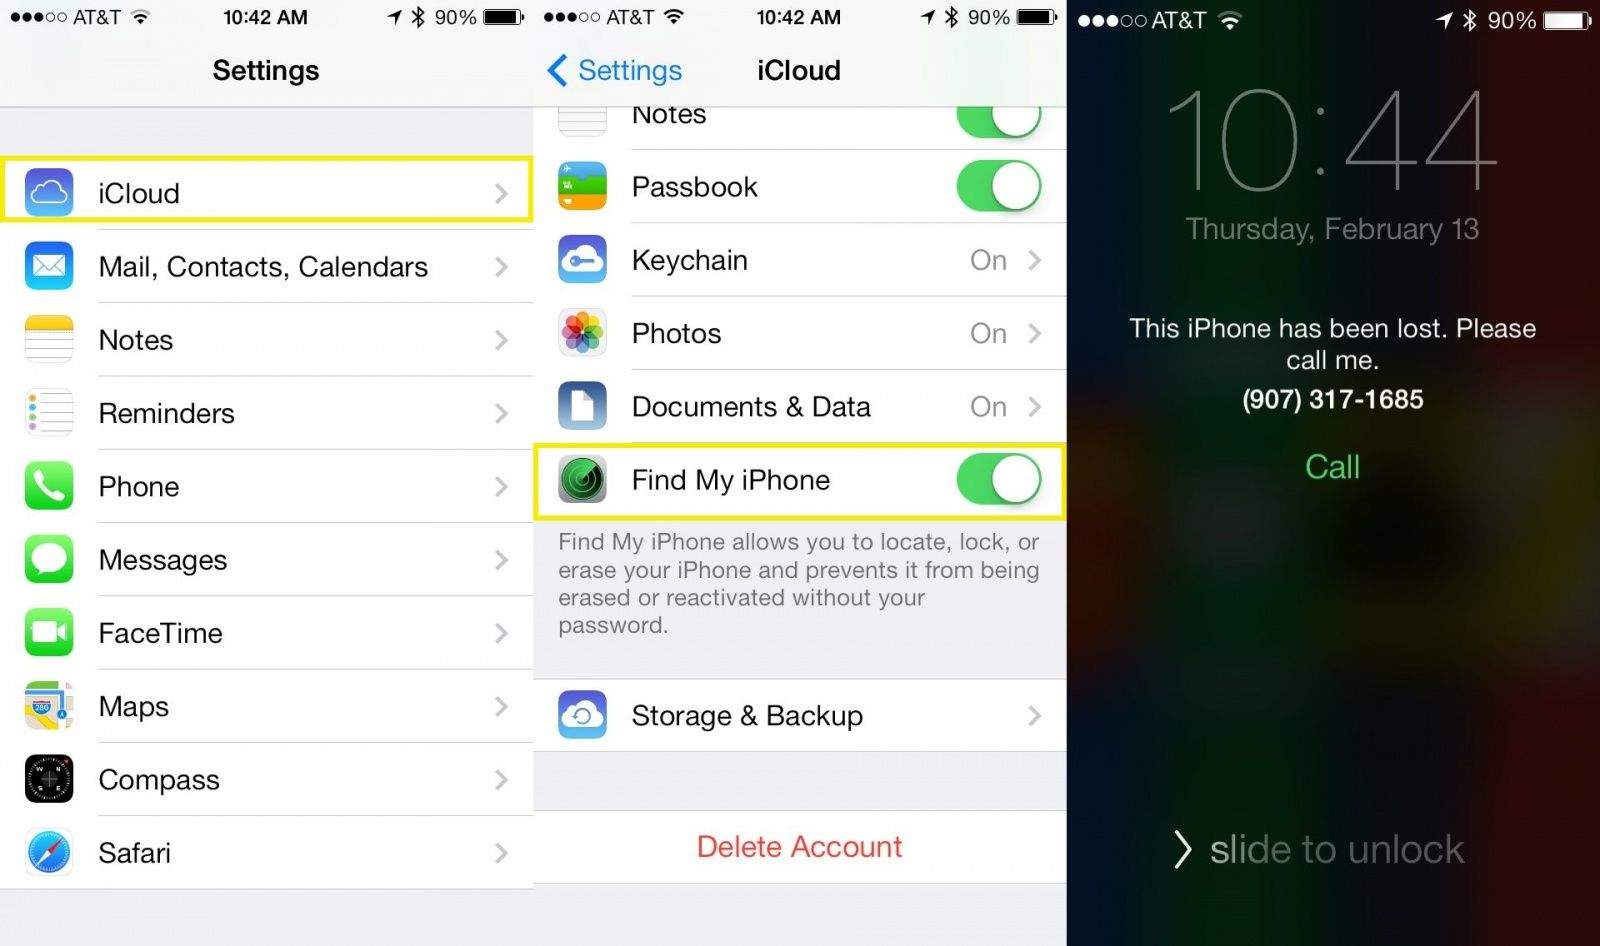 How To Remotely Wipe Your iPhone Data When Stolen [iOS Tips] | Cult of Mac